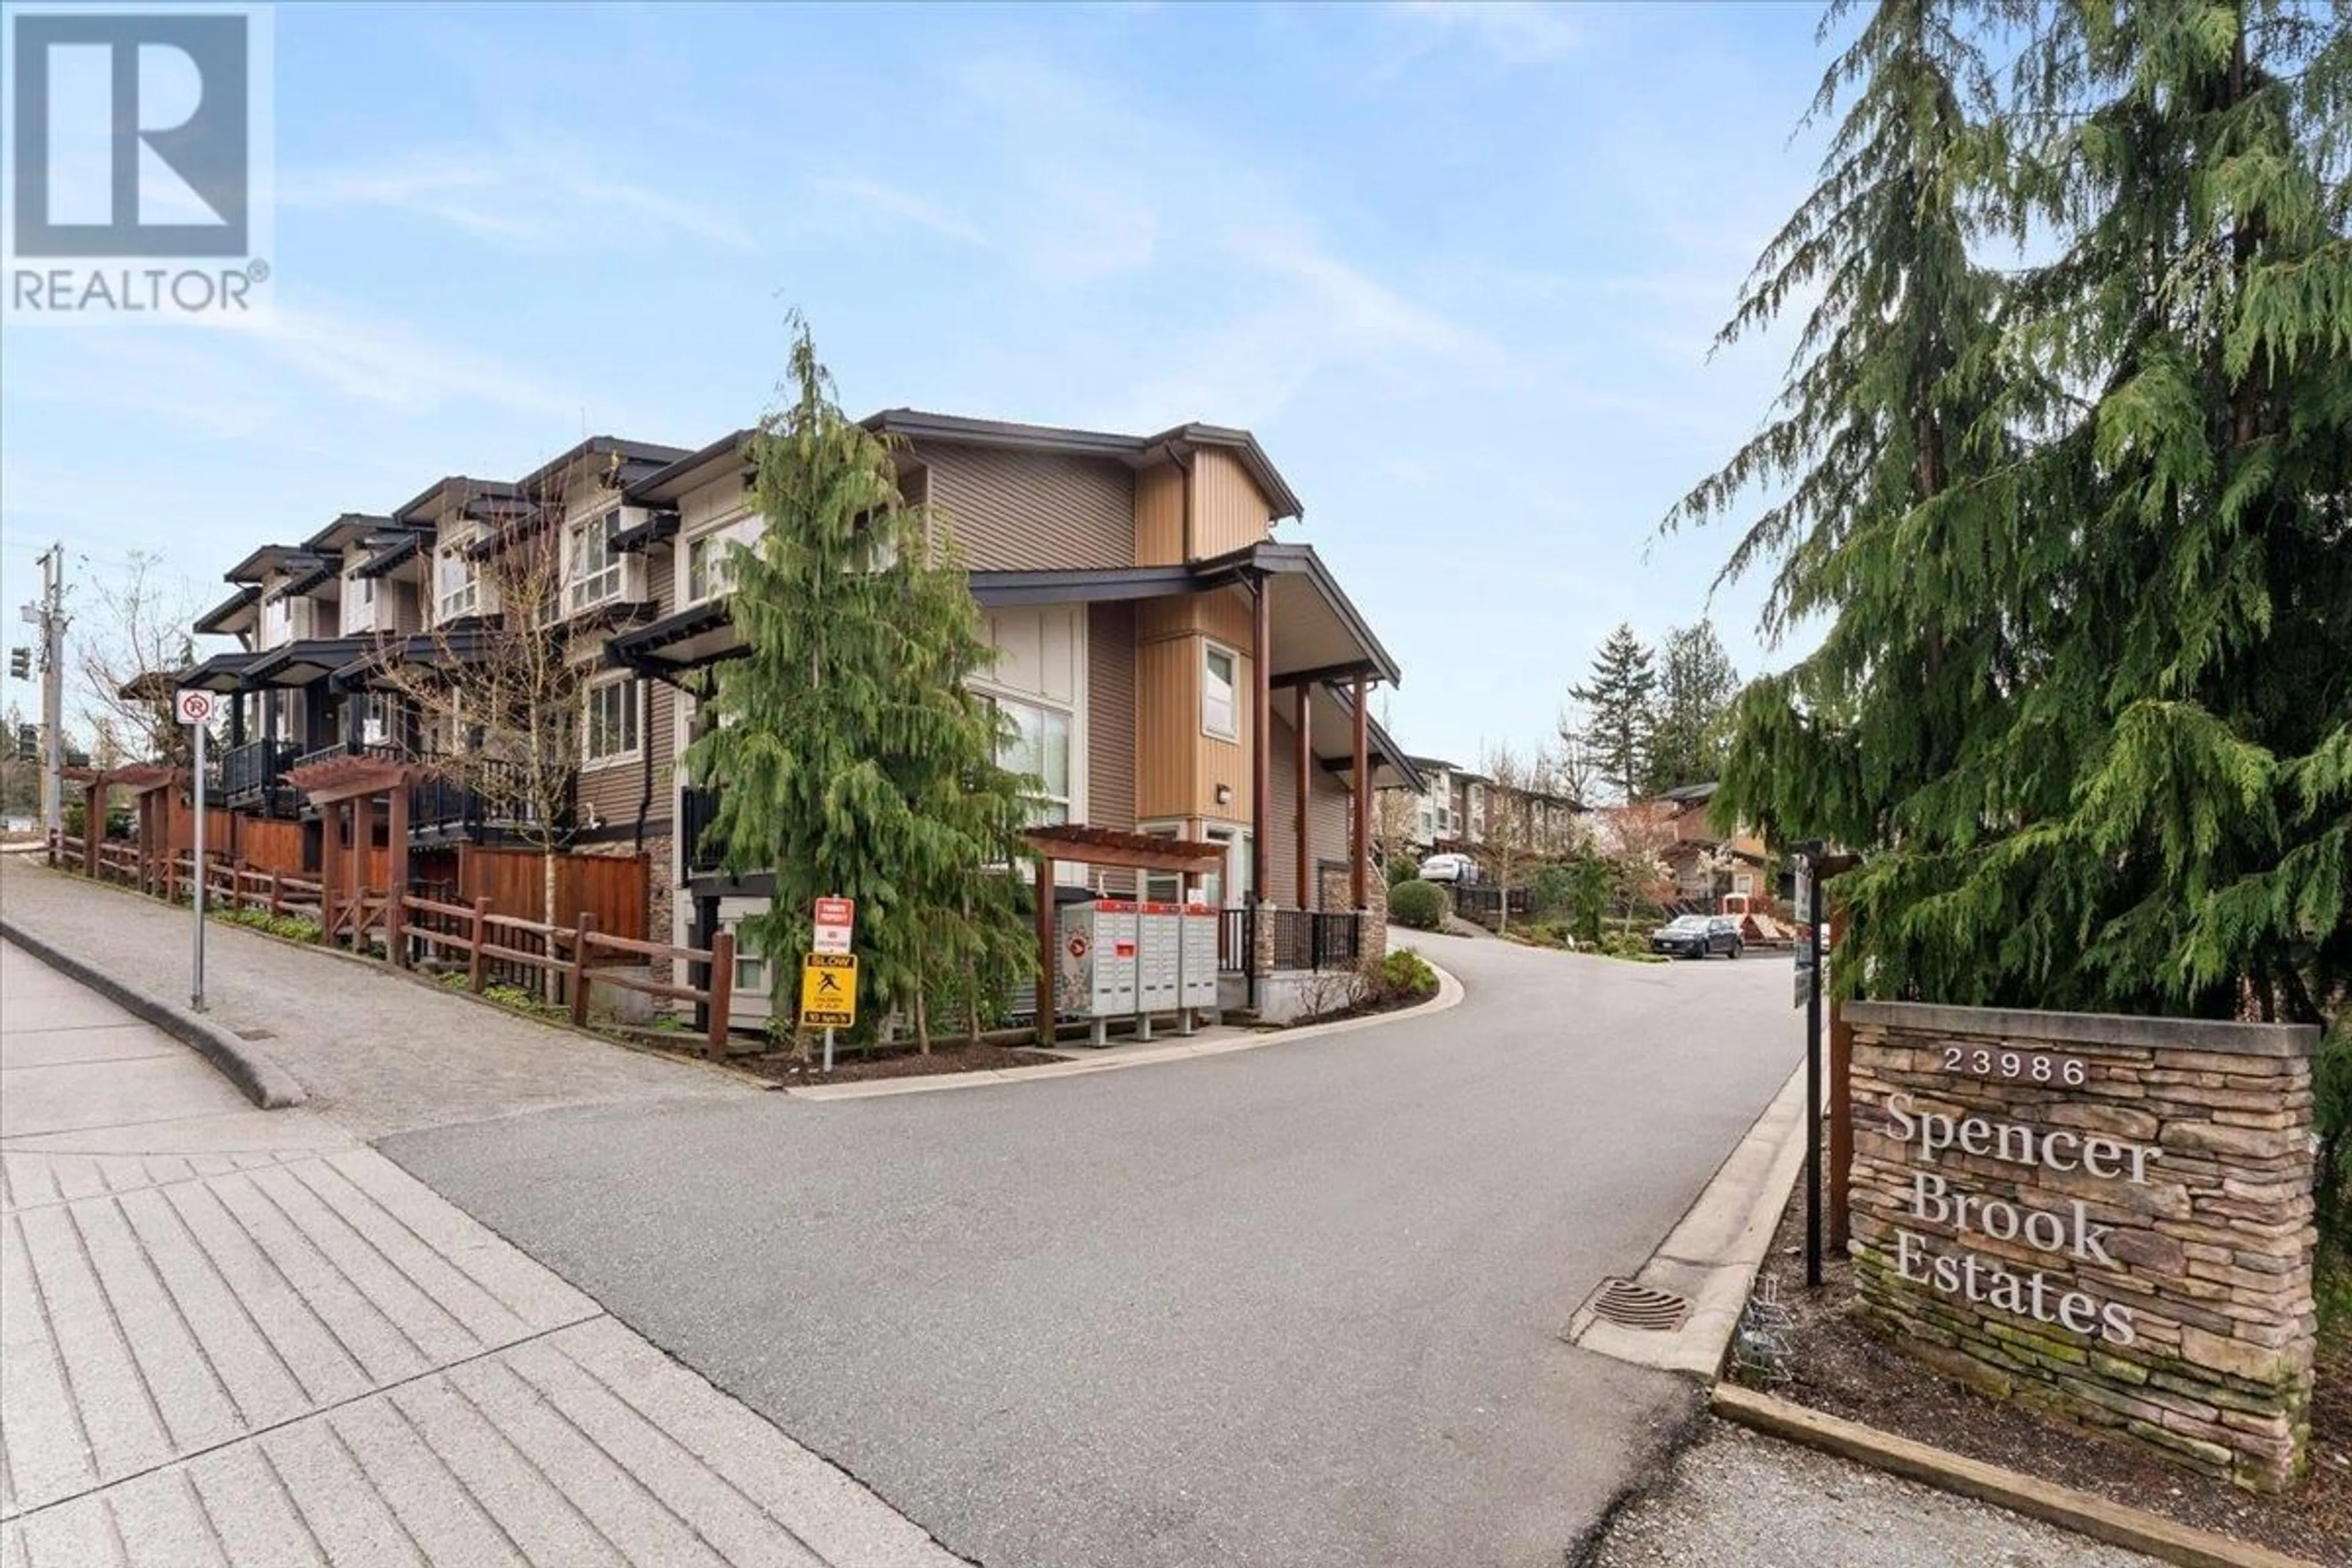 A pic from exterior of the house or condo for 5 23986 104 AVENUE, Maple Ridge British Columbia V2W0G8